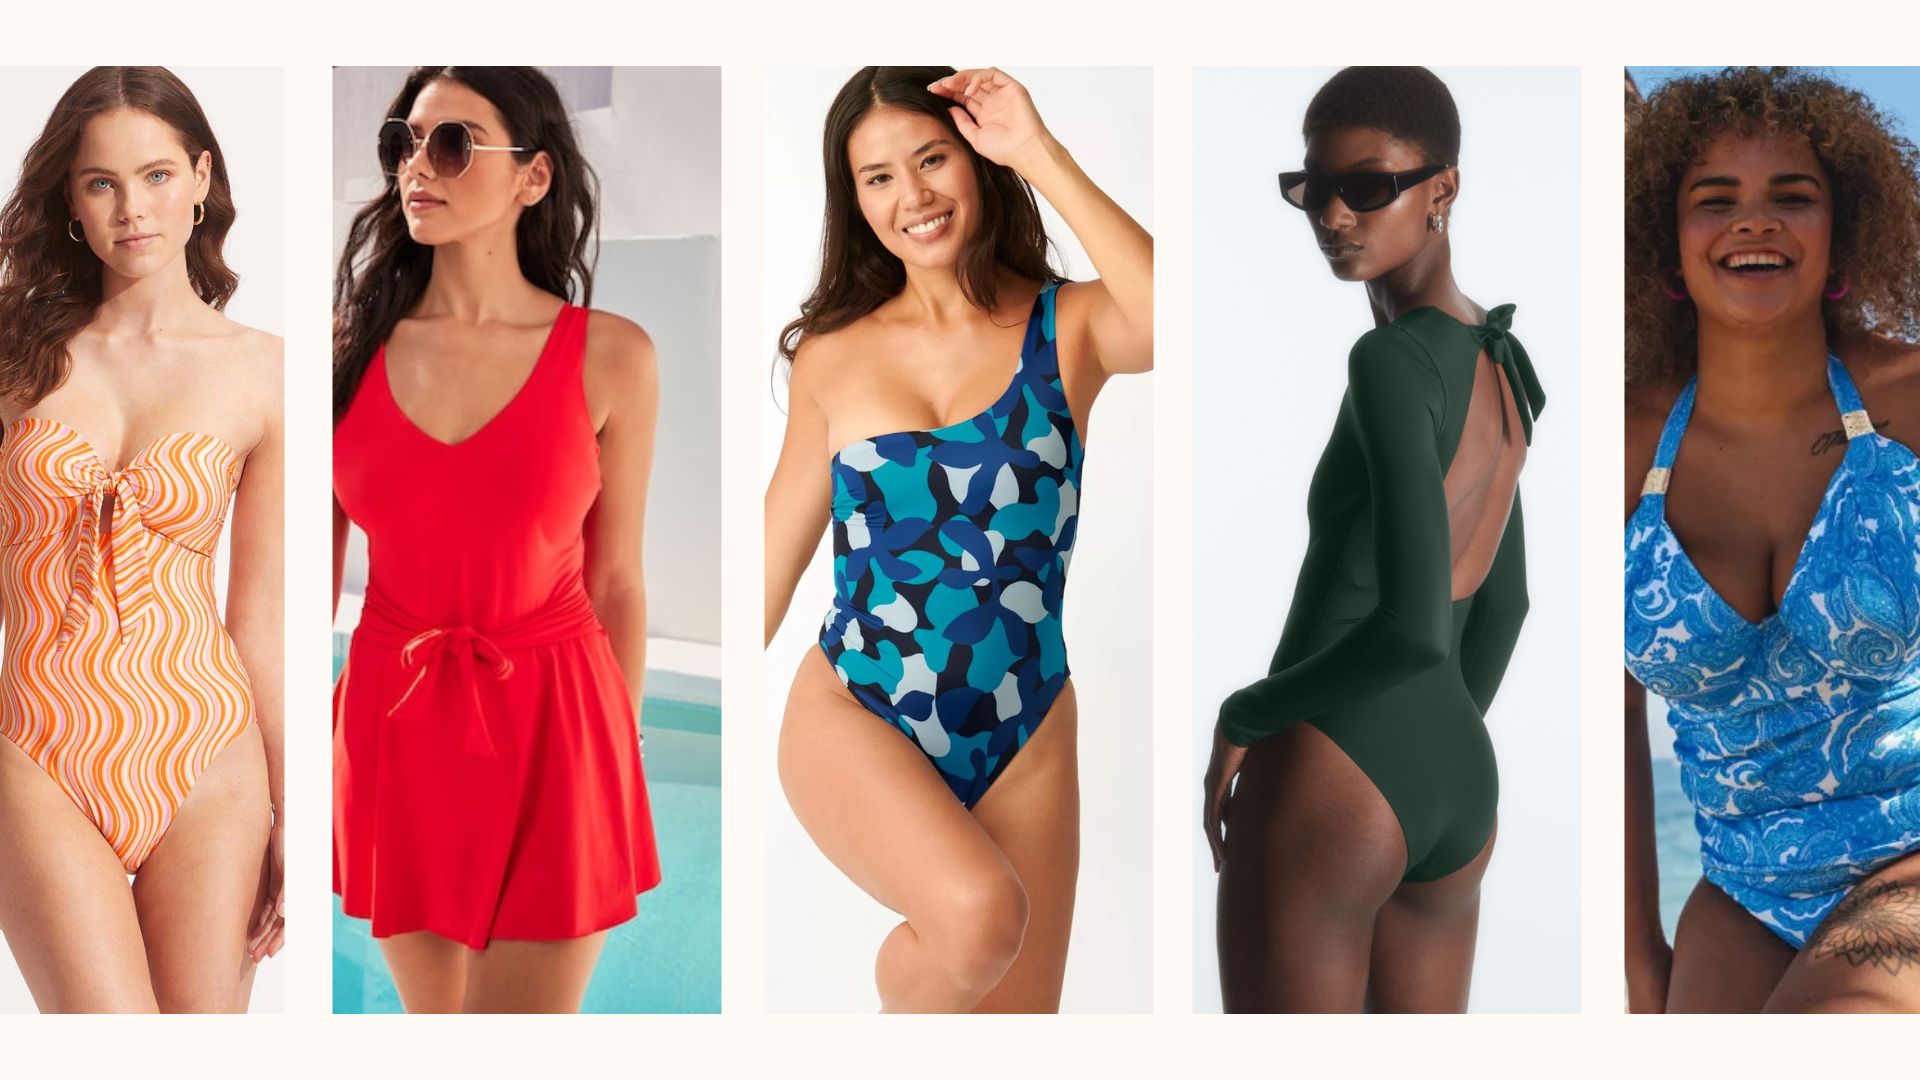 These are the swimsuit types to know before shopping this summer